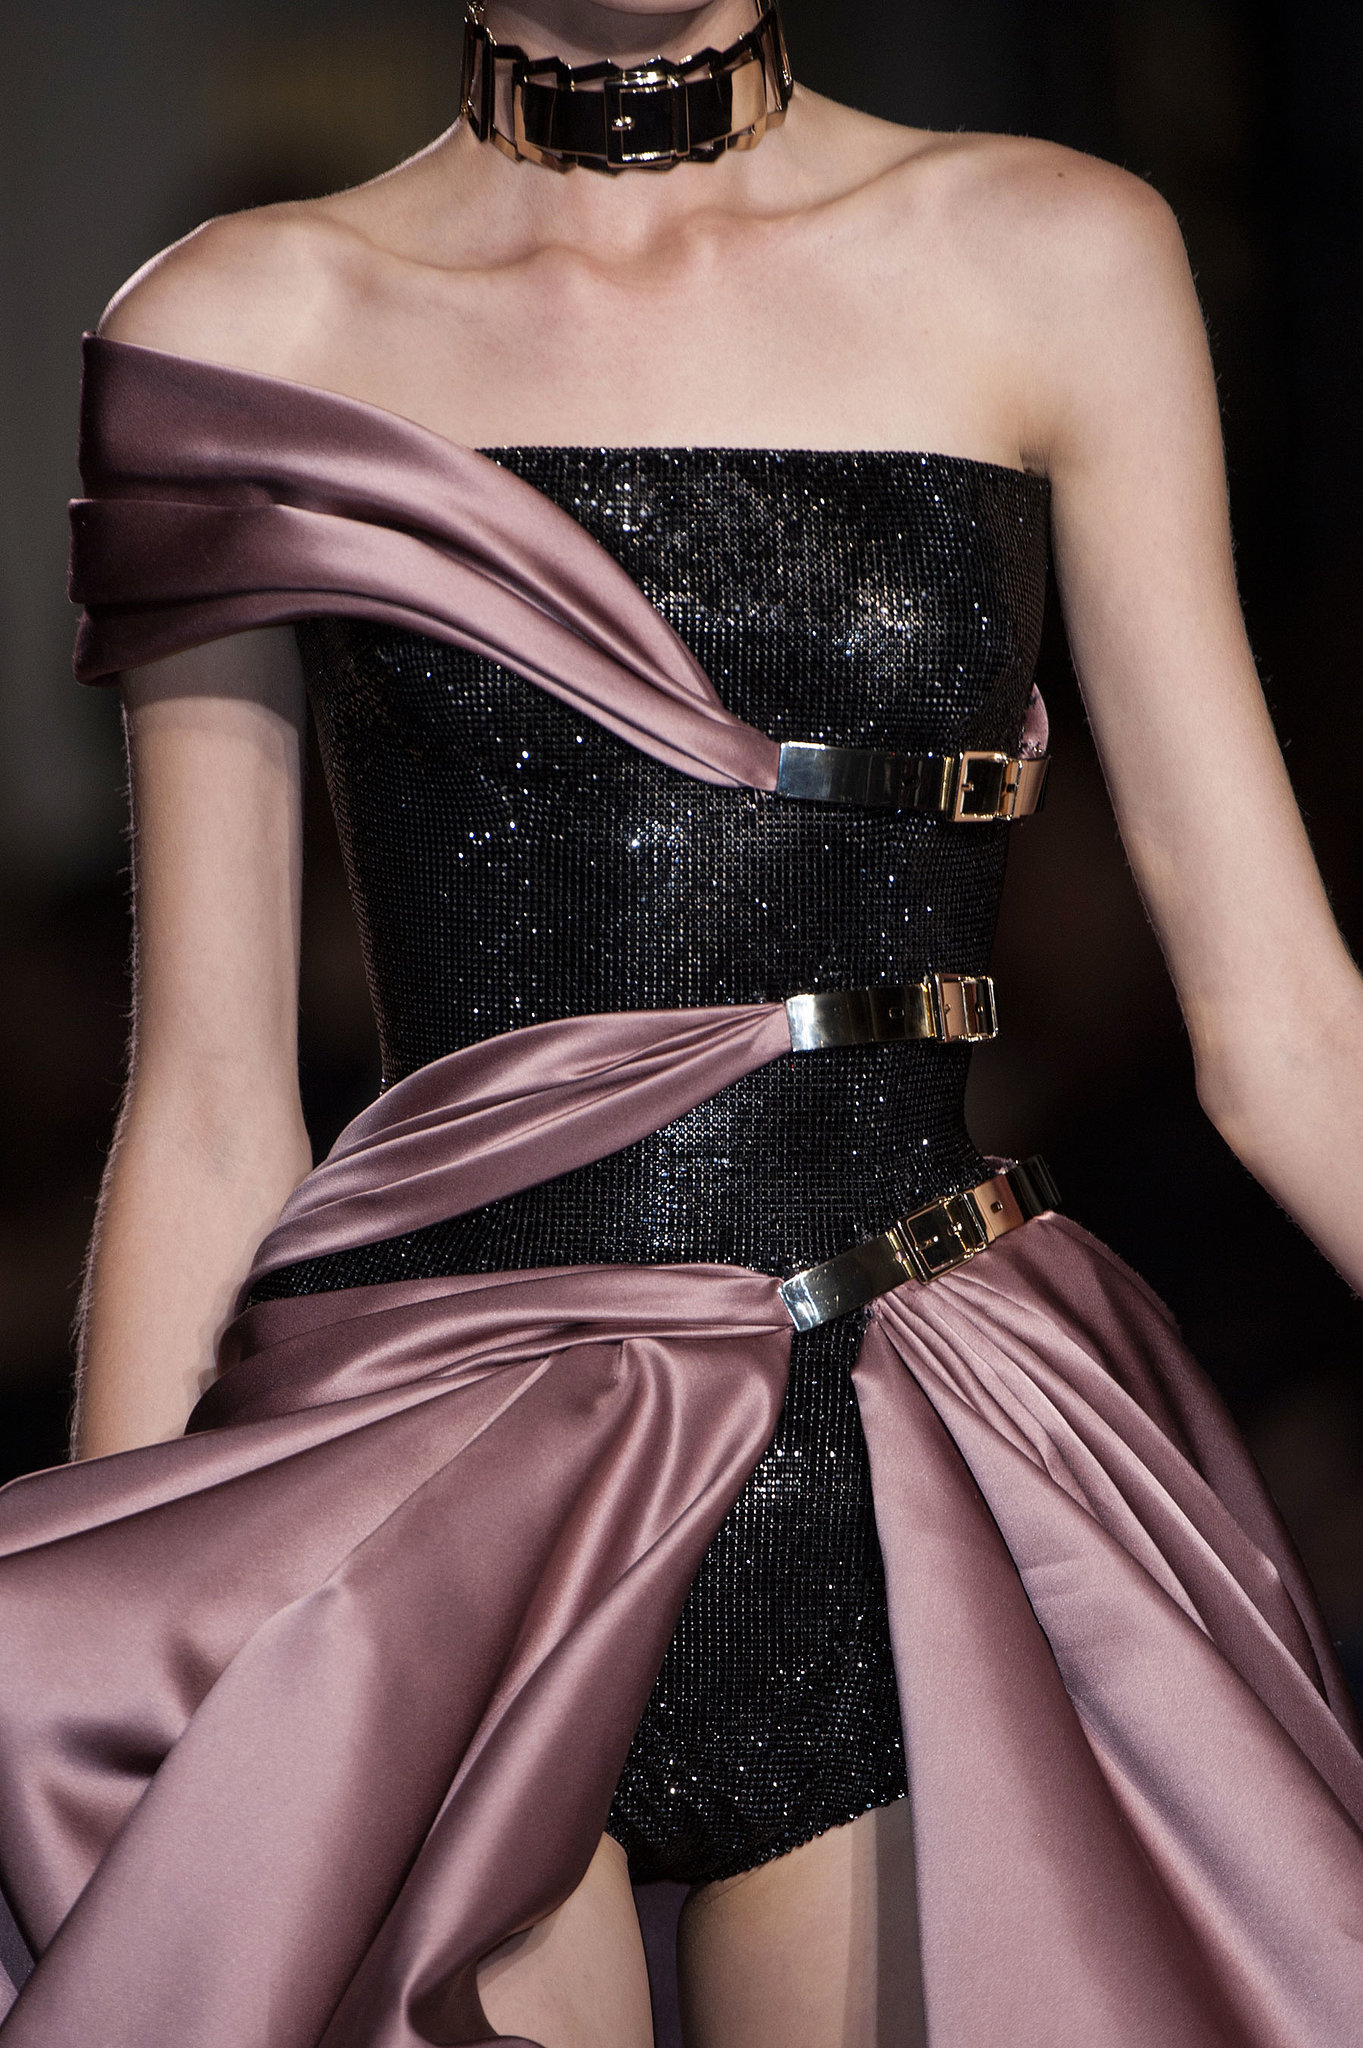 Atelier Versace Haute Couture Fall 2014 66 Couture Photos That Will Take Your Breath Away 